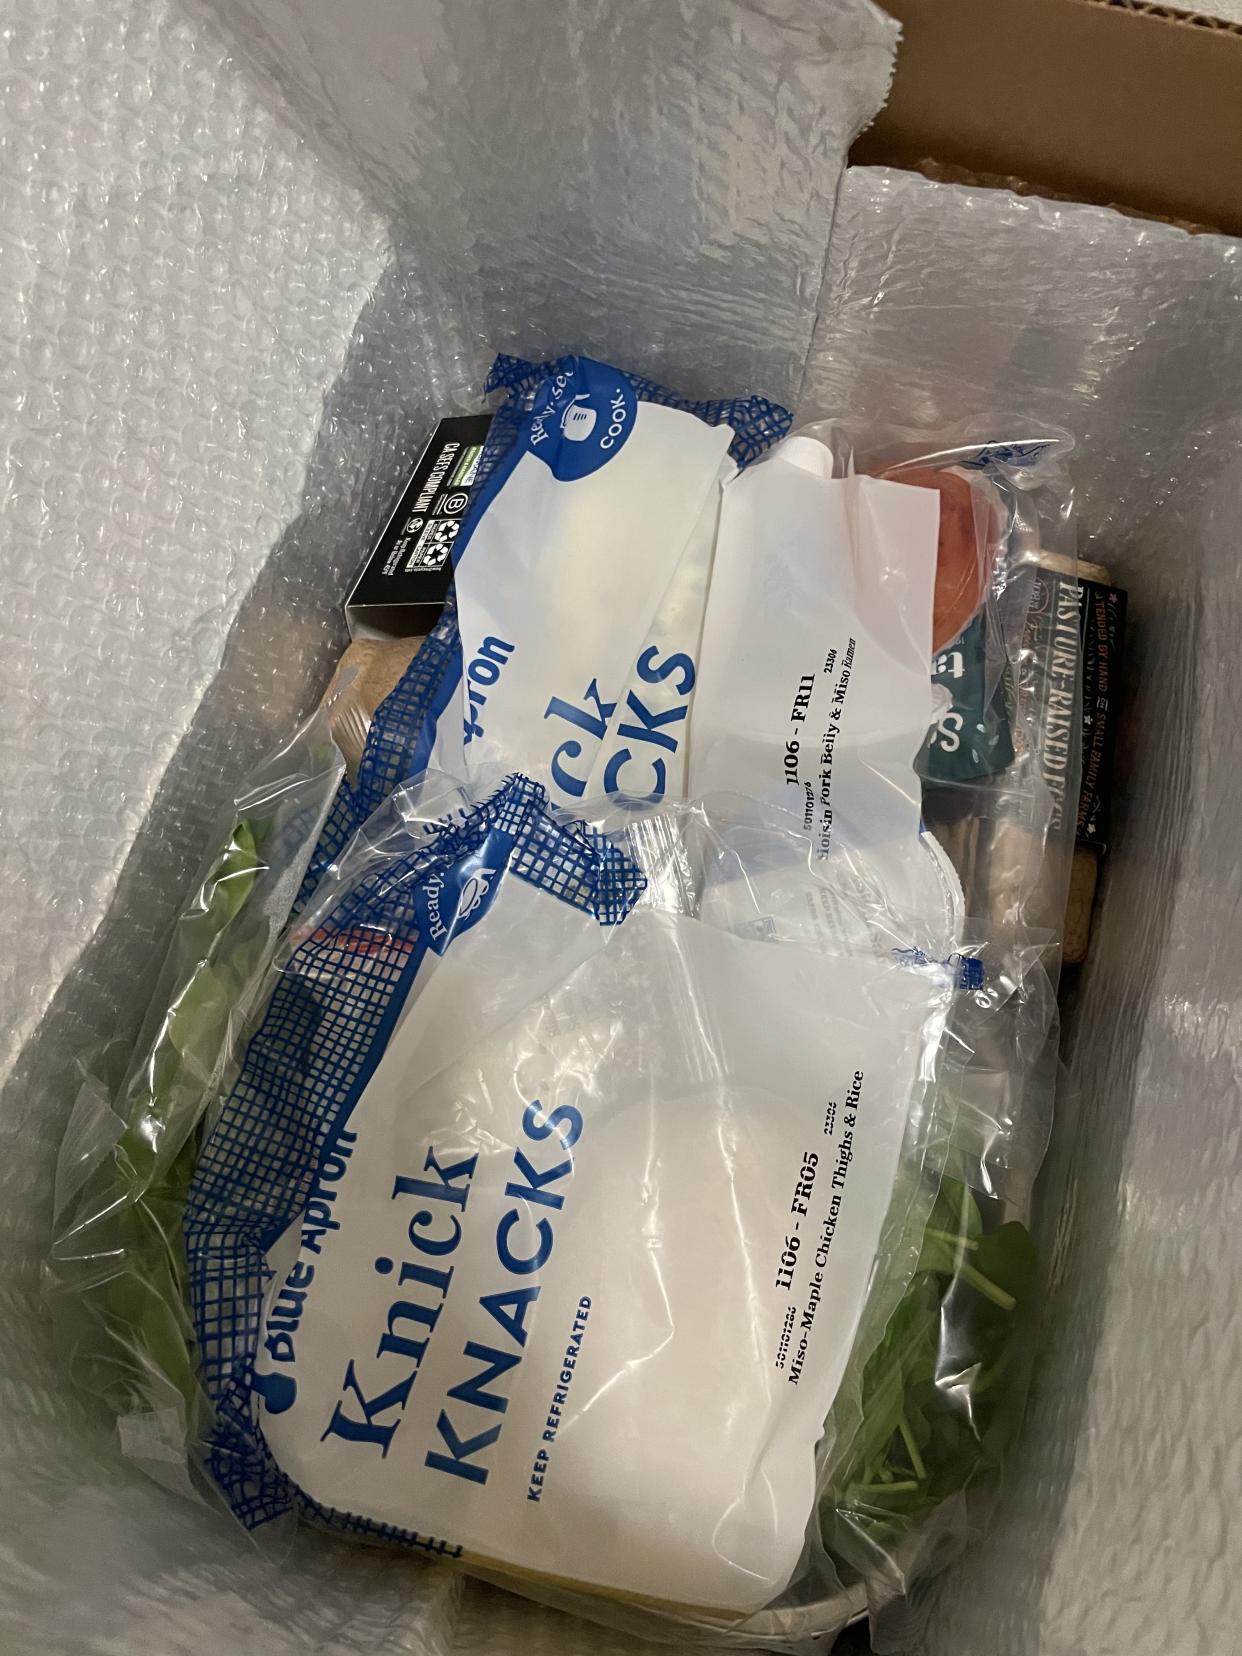 Open box with plastic bags full of ingredients